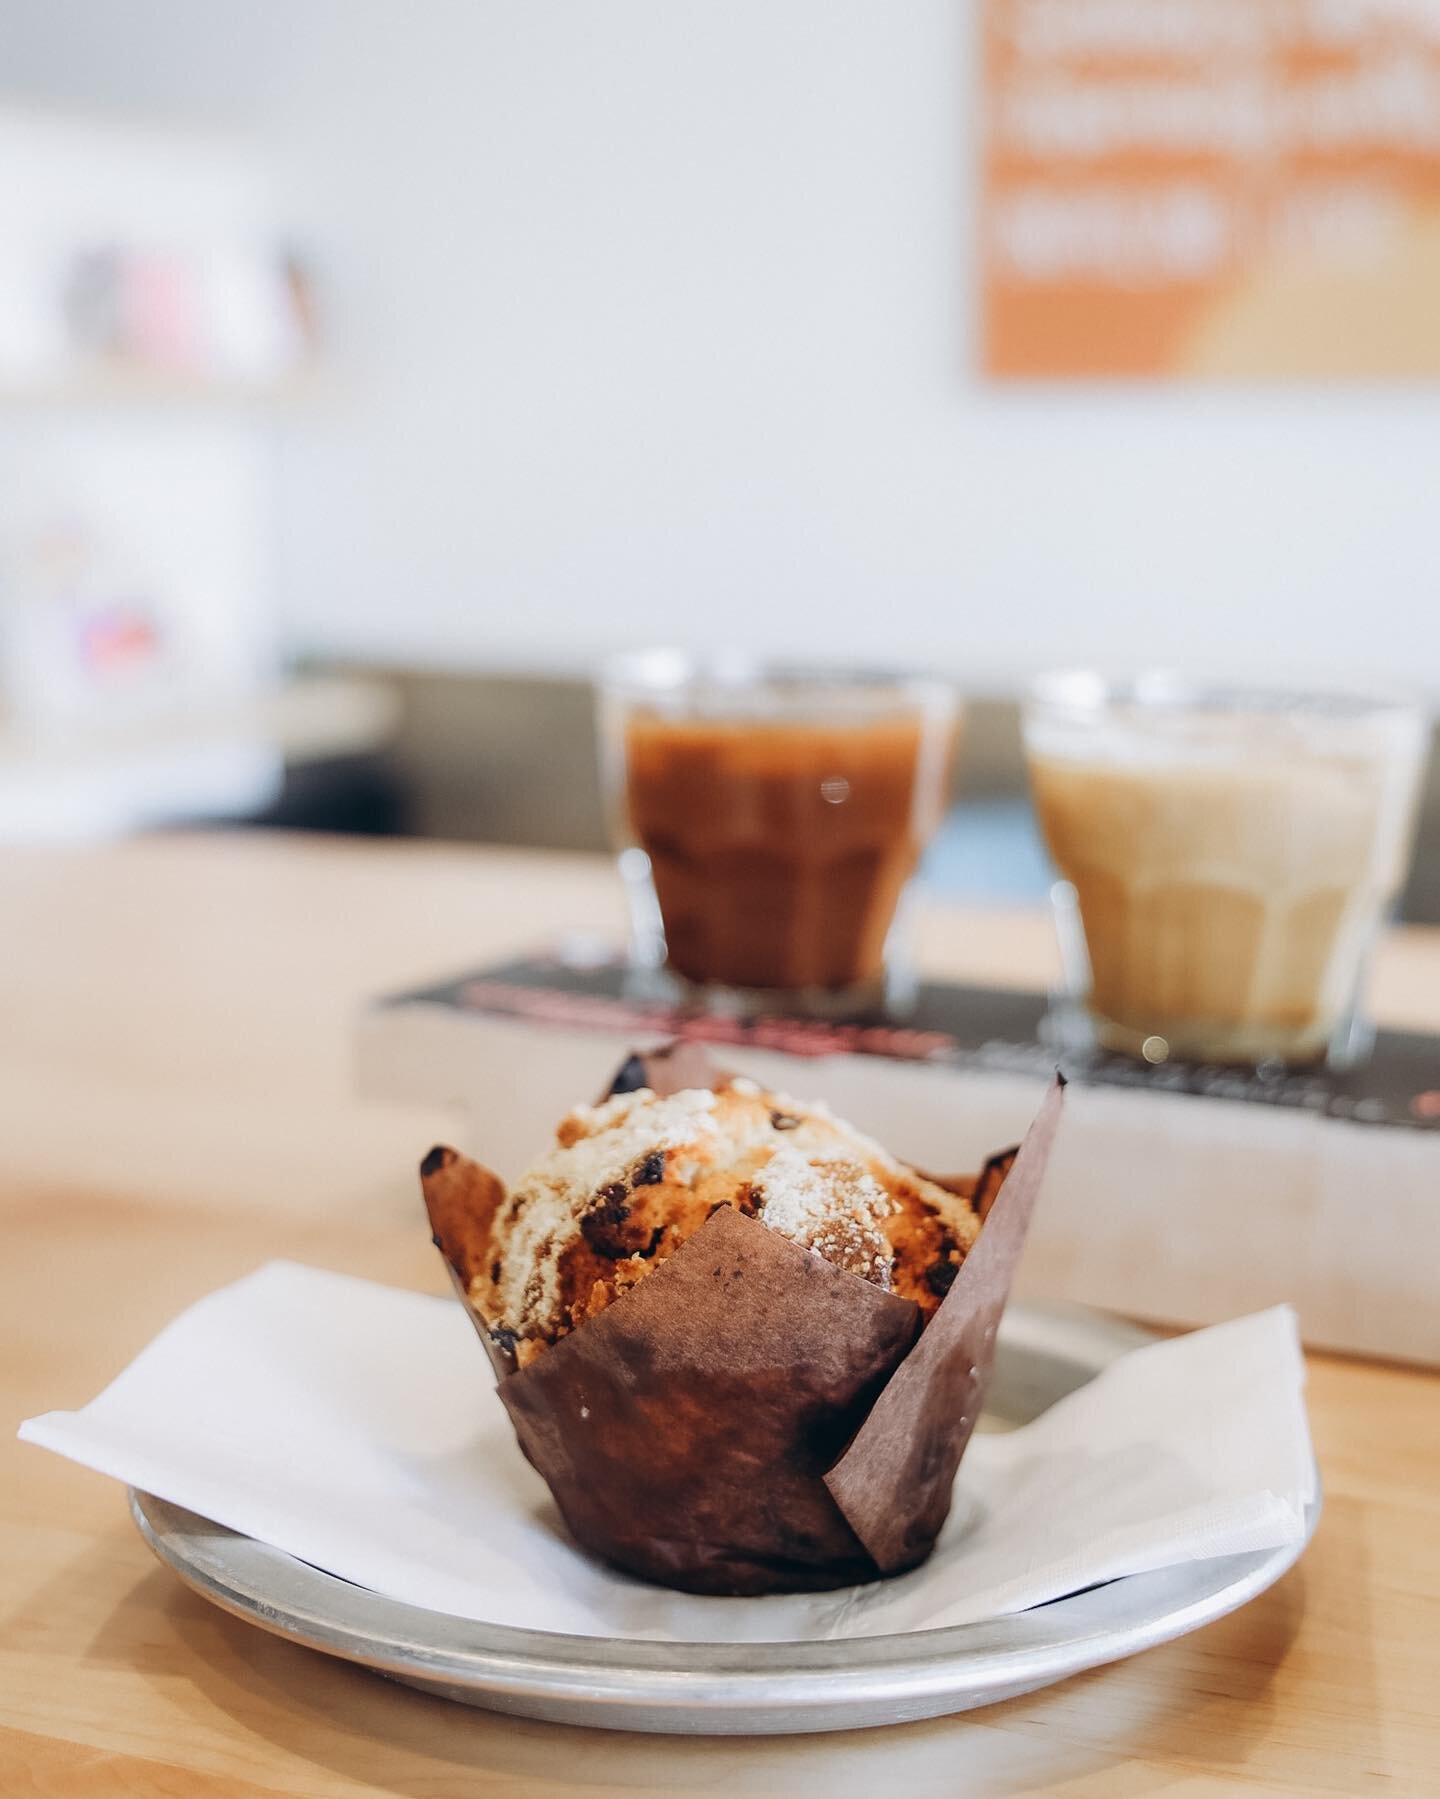 It&rsquo;s FriYAY! Grab your friends and come celebrate the weekend with a few of our sweet treats! We&rsquo;ll be here til 7 🤍

#friday #fridayvibes #friyay #weekendbrunch #newday #lincoln #lnk #eatlnk #lnkcoffeeshops #lincolnneb #lincolnnebraska #